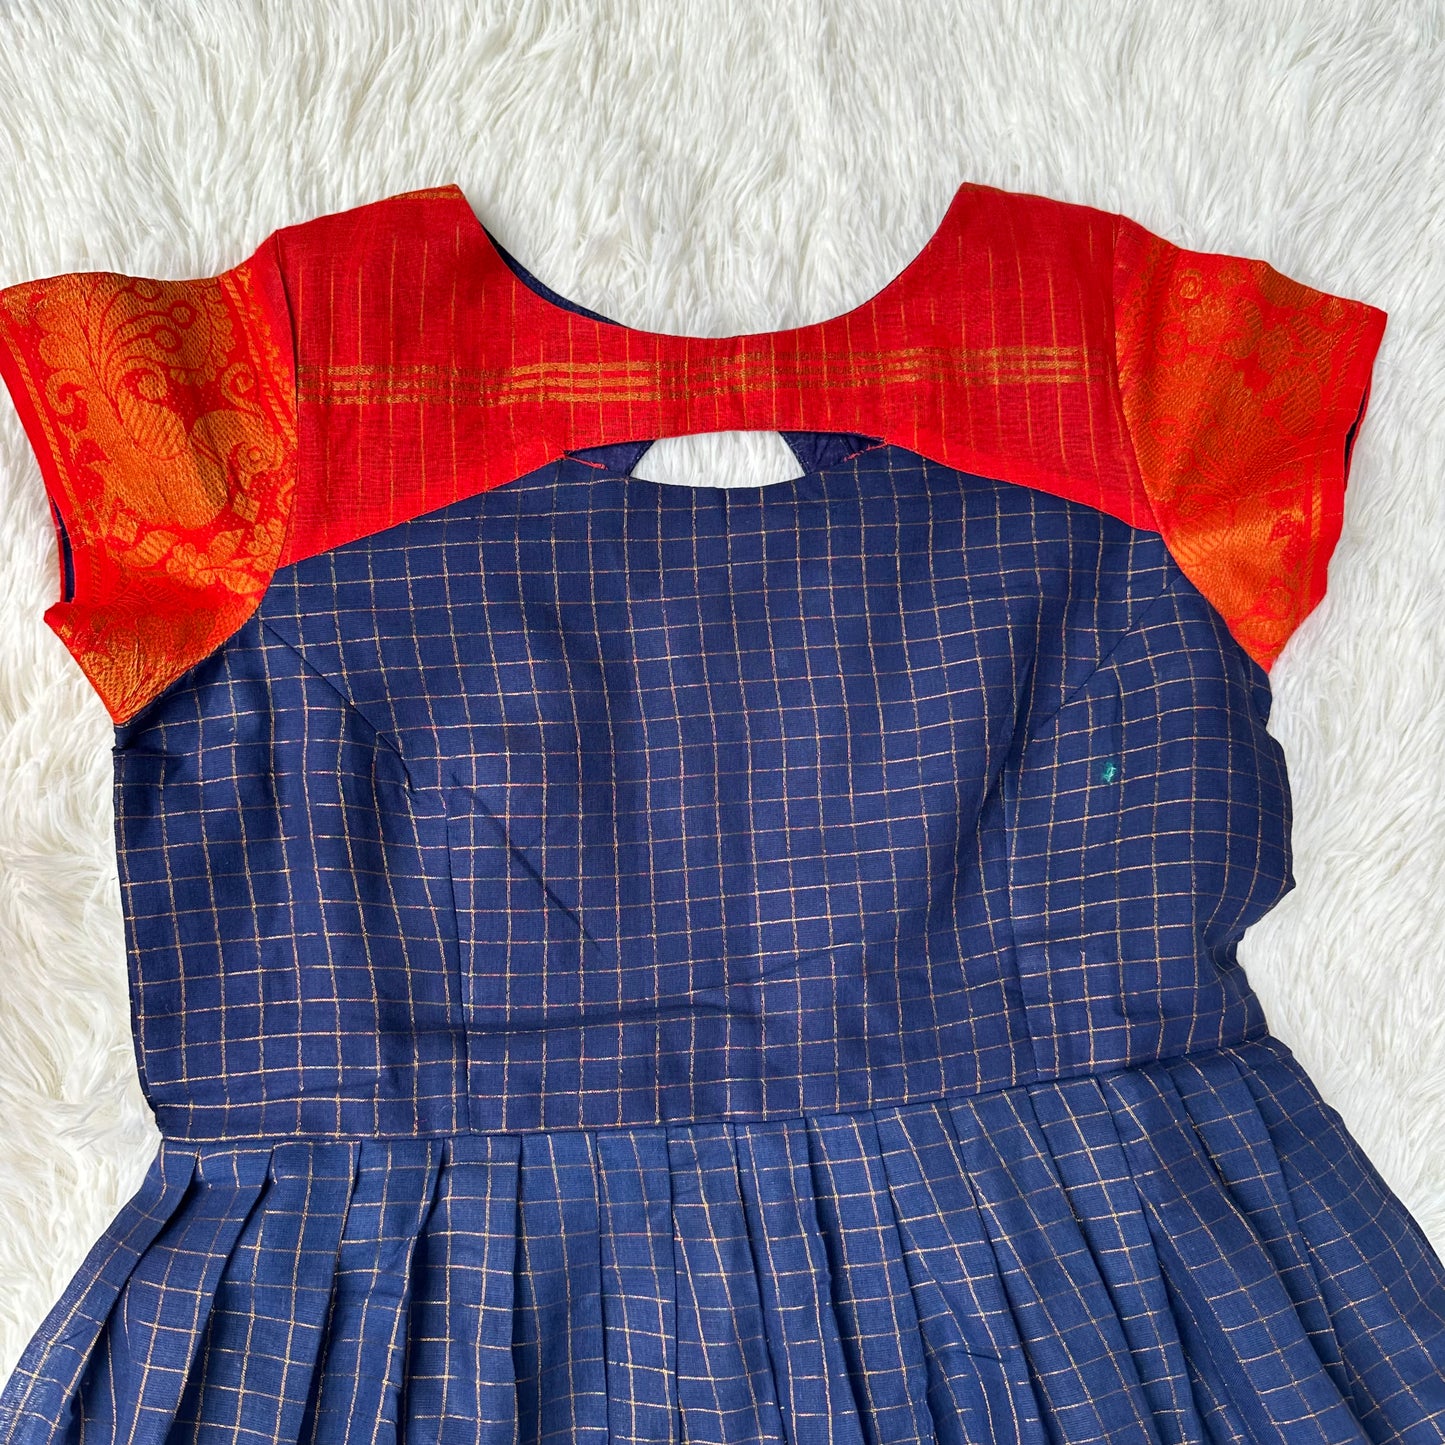 Chic Elegance: Navy Blue and Red Sungudi Frock